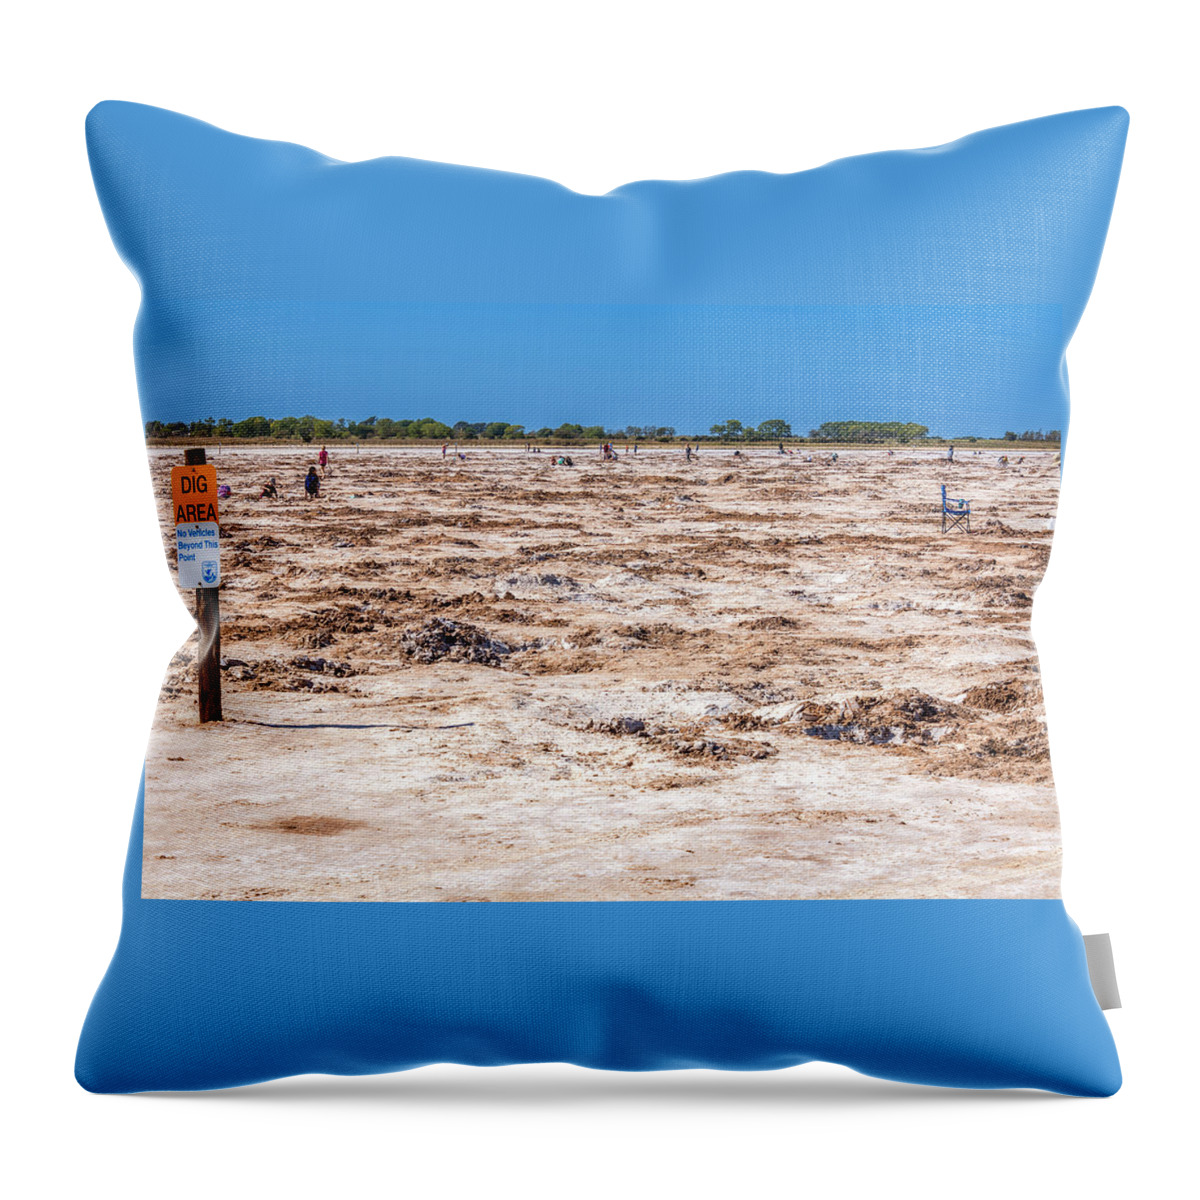 Oklahoma Throw Pillow featuring the photograph Salt Plains Dig Area For Crystals by Debra Martz